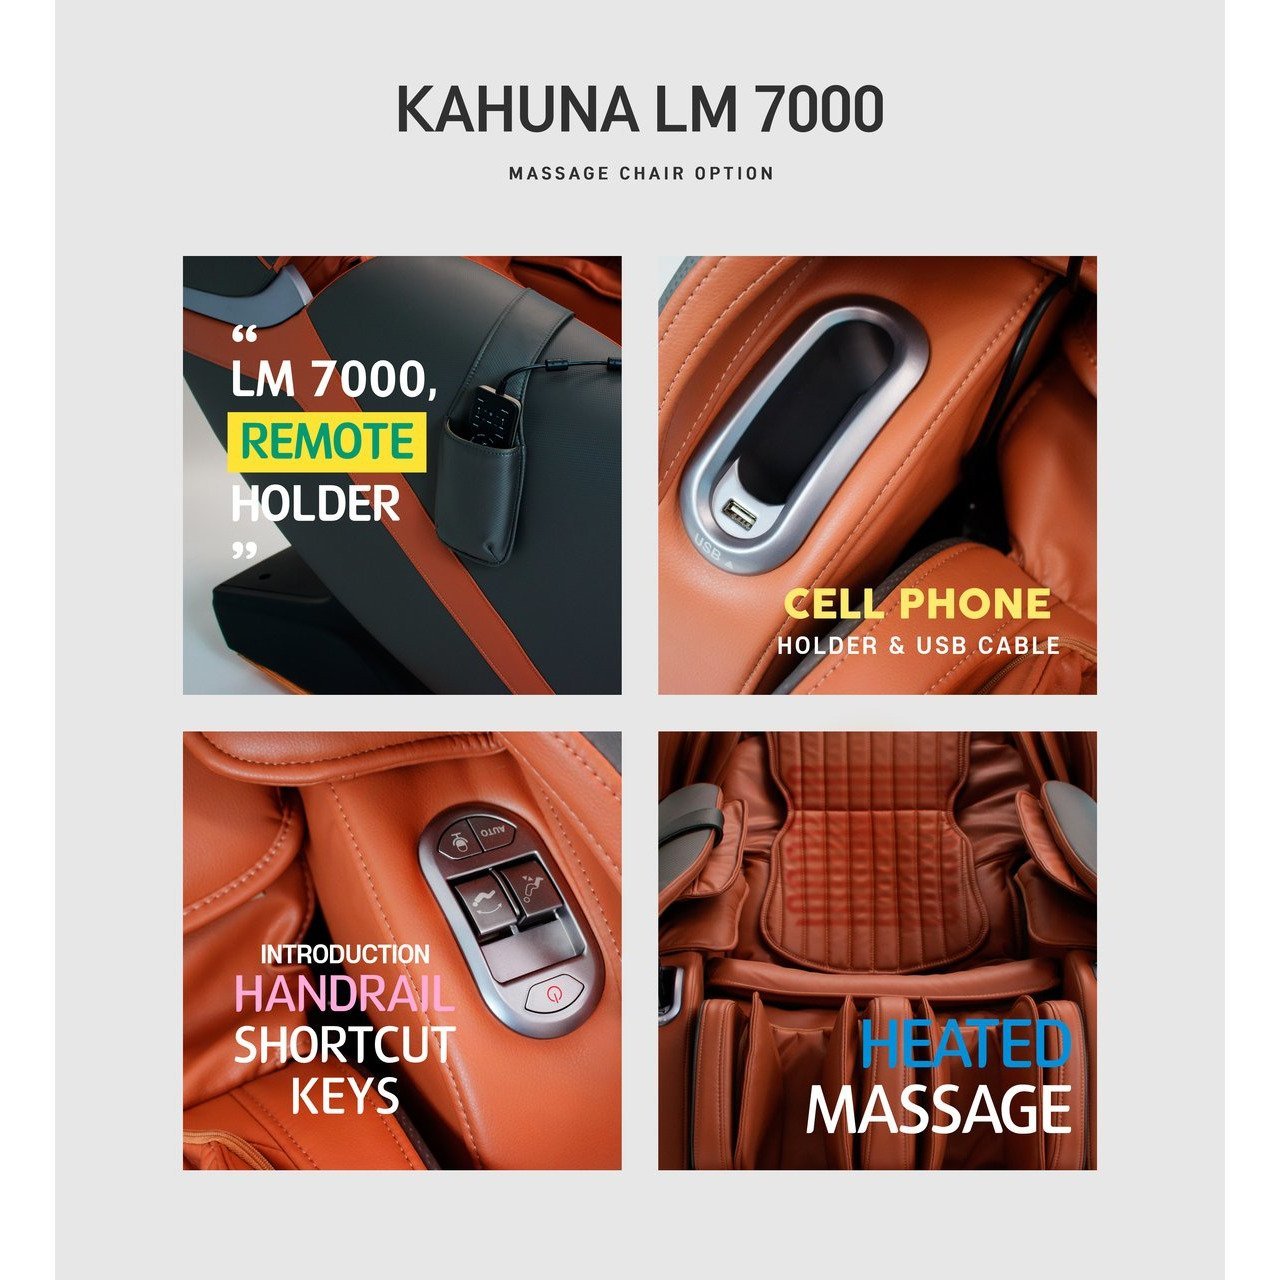 Kahuna LM7000 massage chair extra features